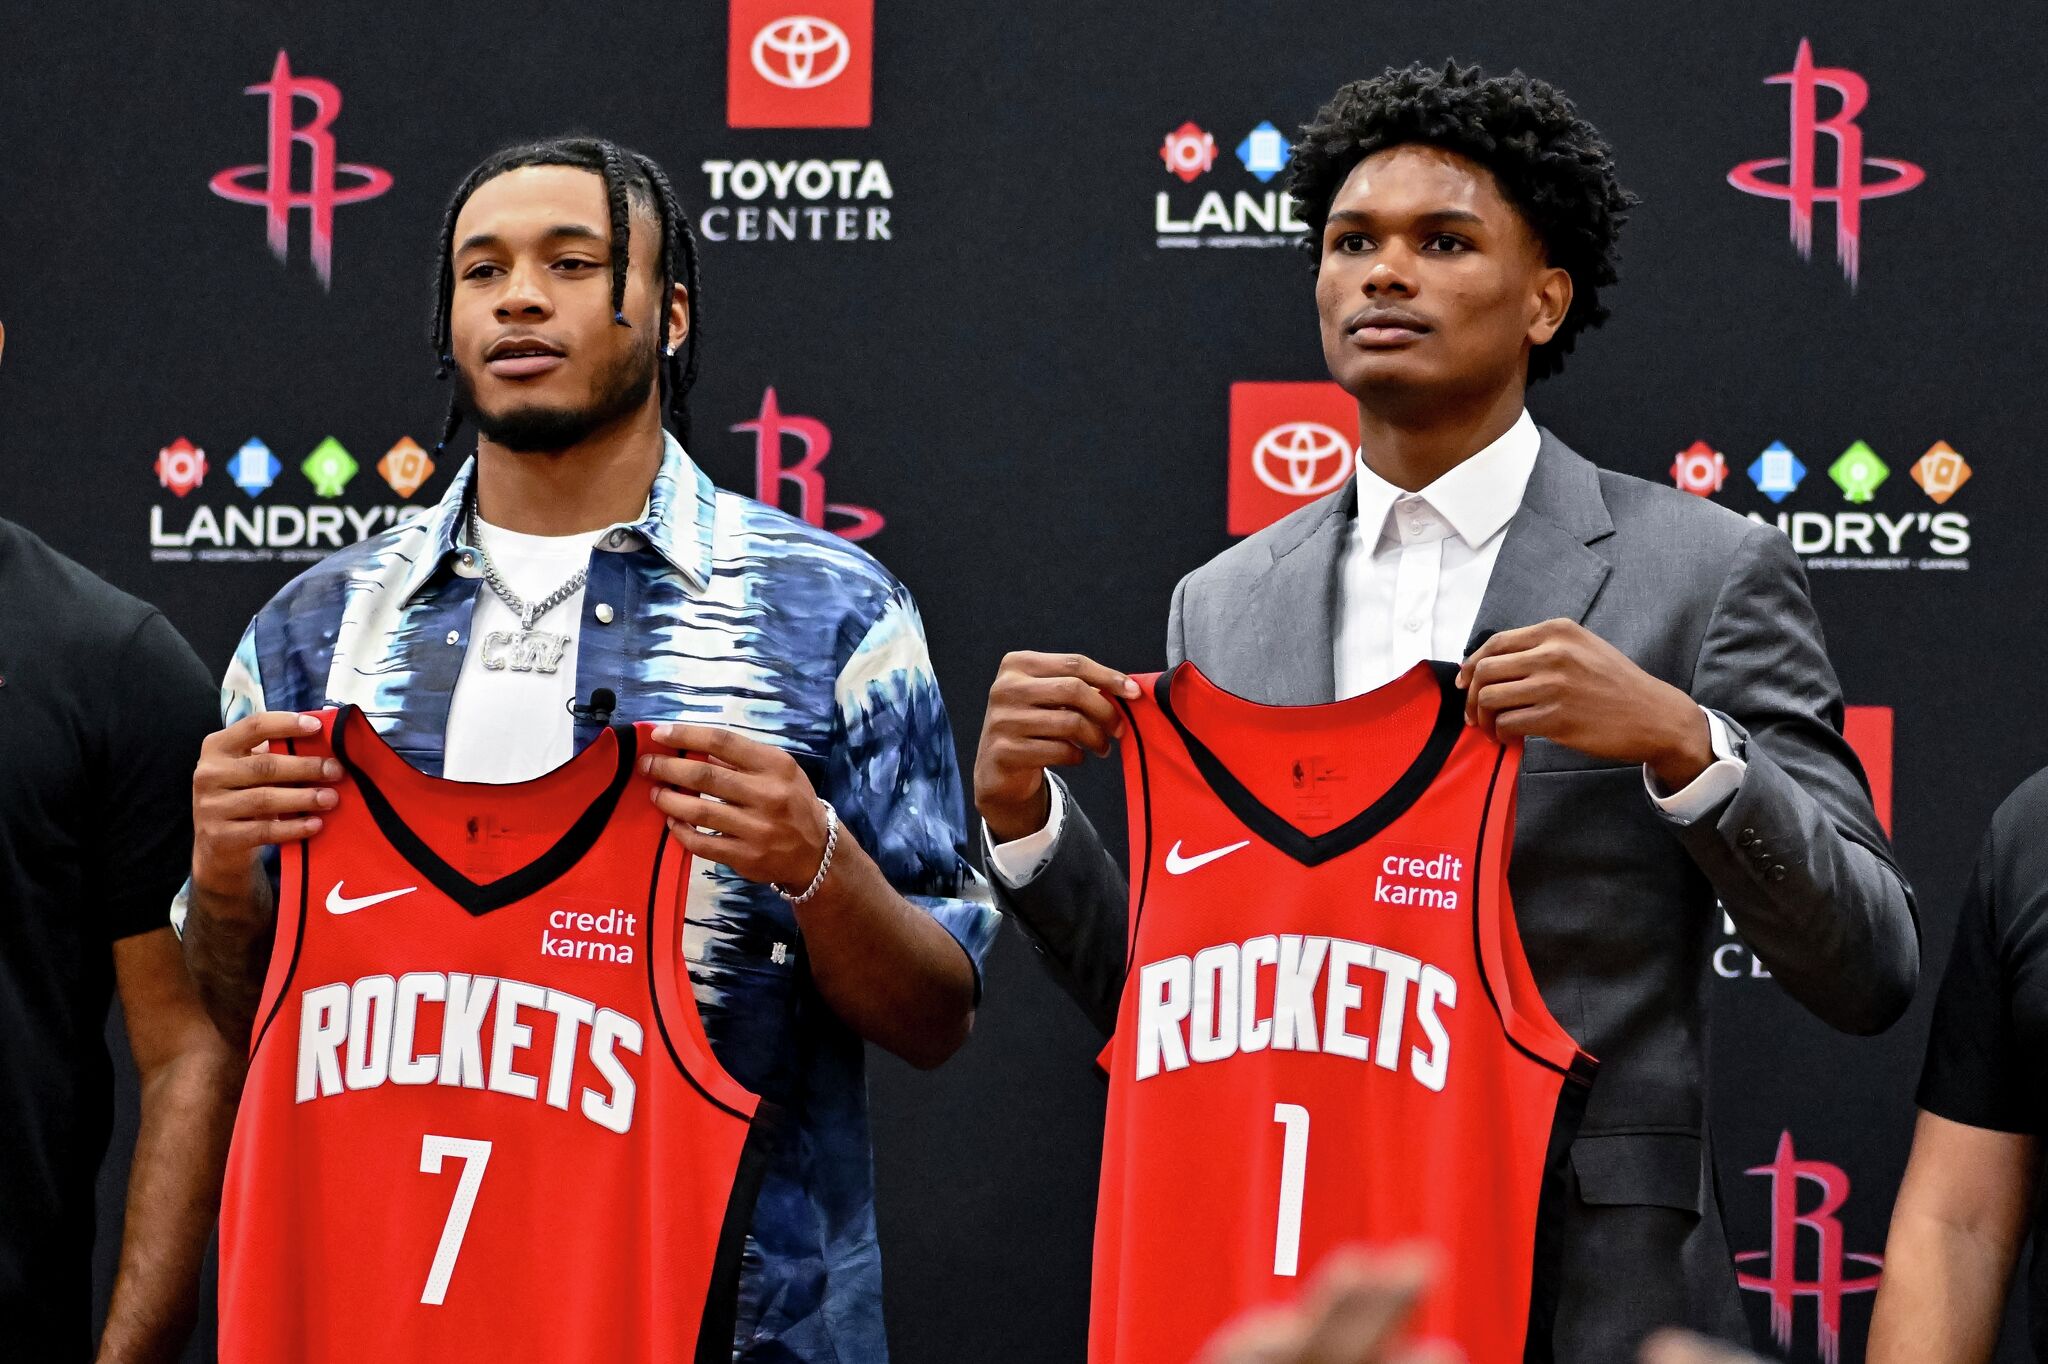 How y'all feel about the Rockets New City jerseys? : r/rockets